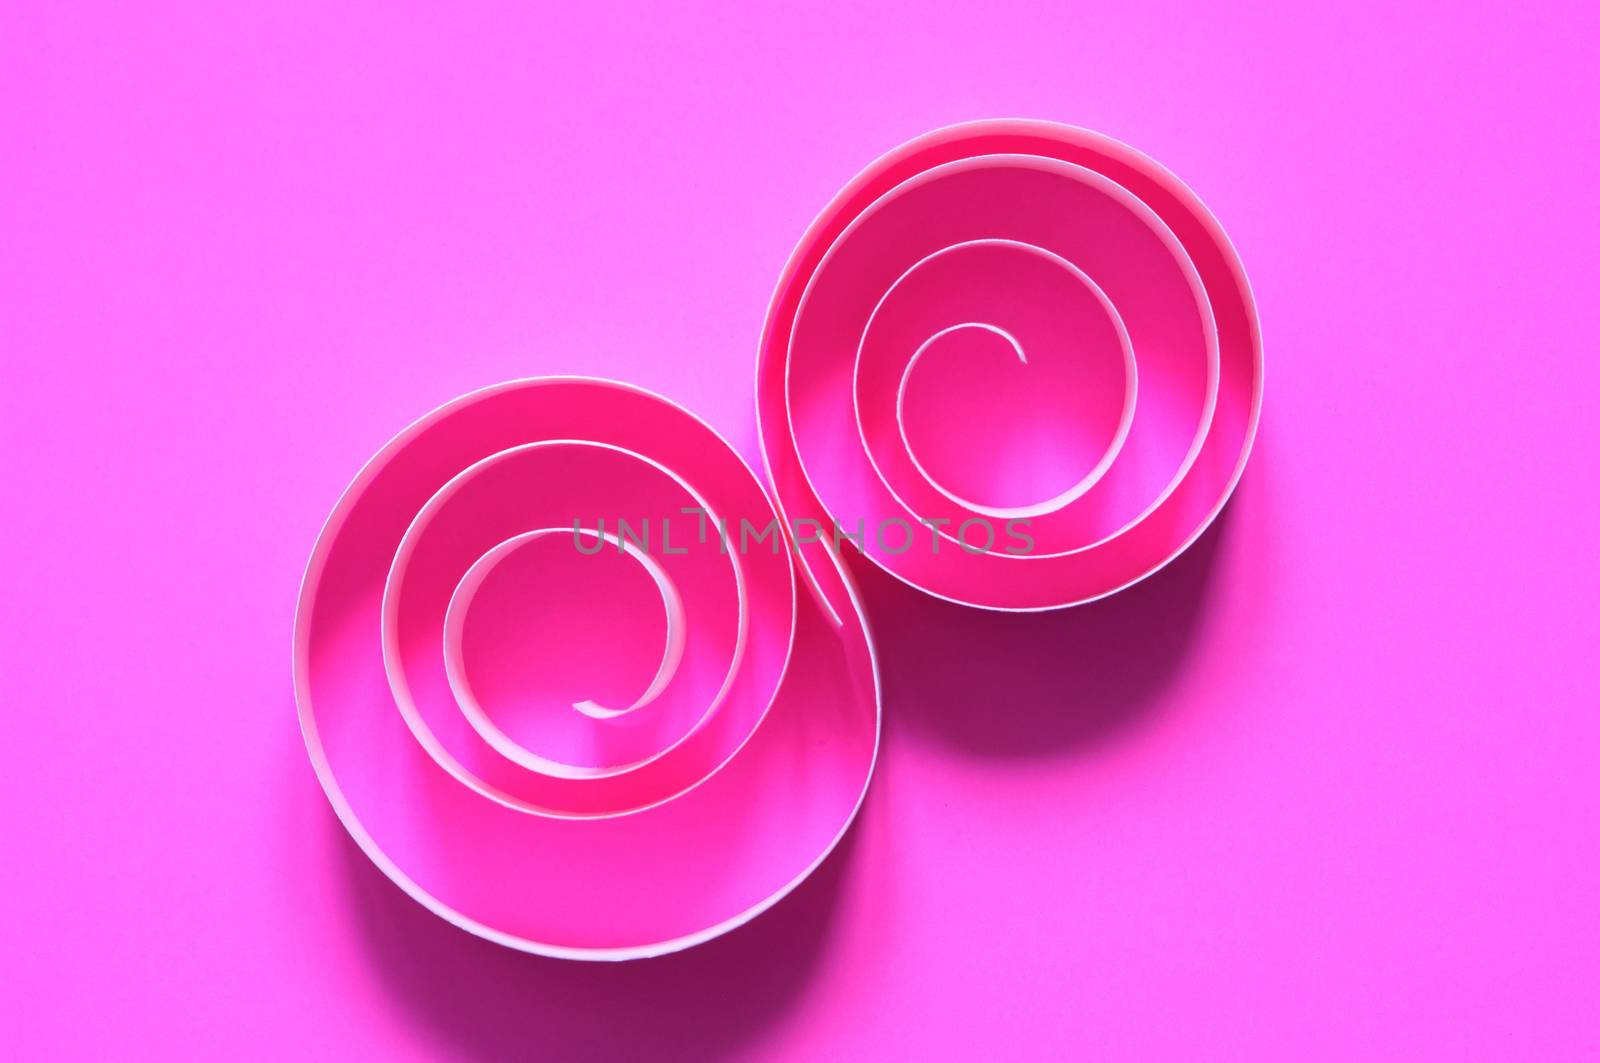 Abstract composition made from paper spirals on pink background